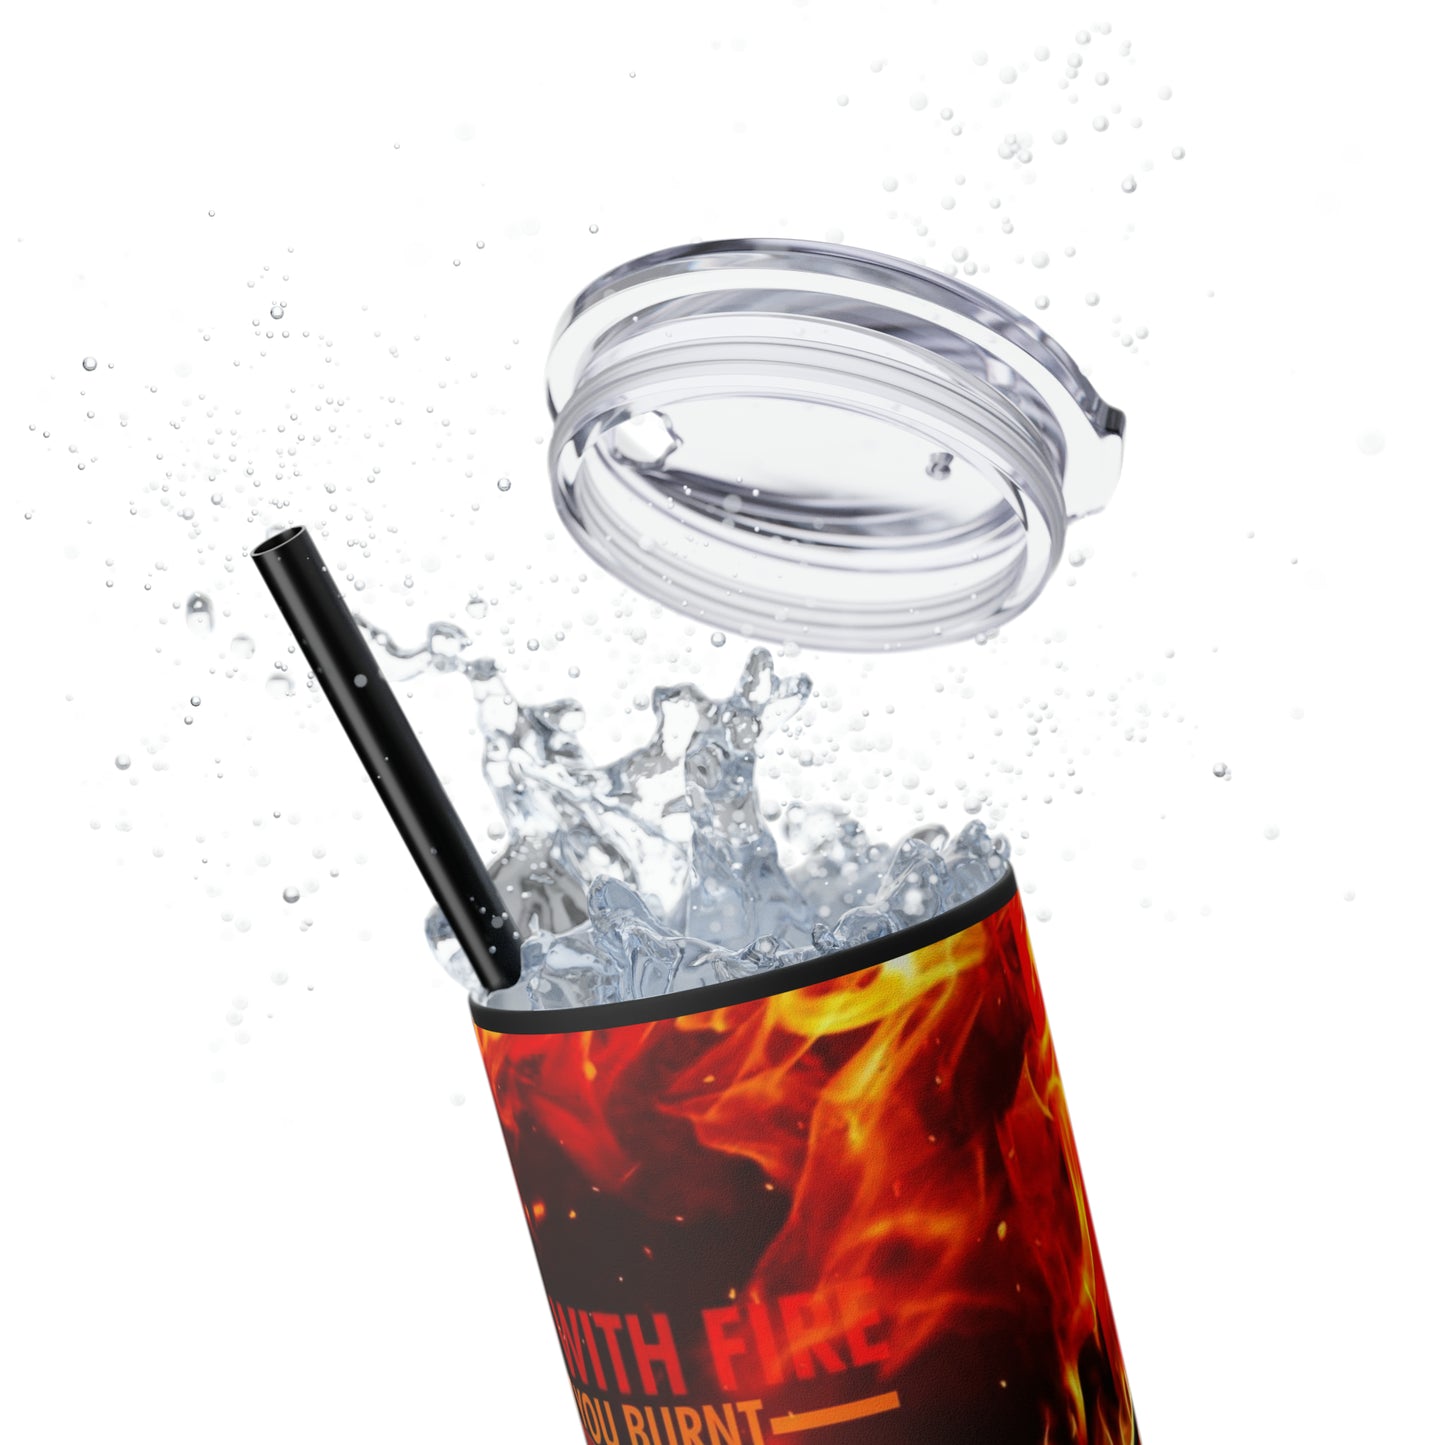 Fire & Rescue Fire Fighter Skinny Tumbler with Straw, 20oz